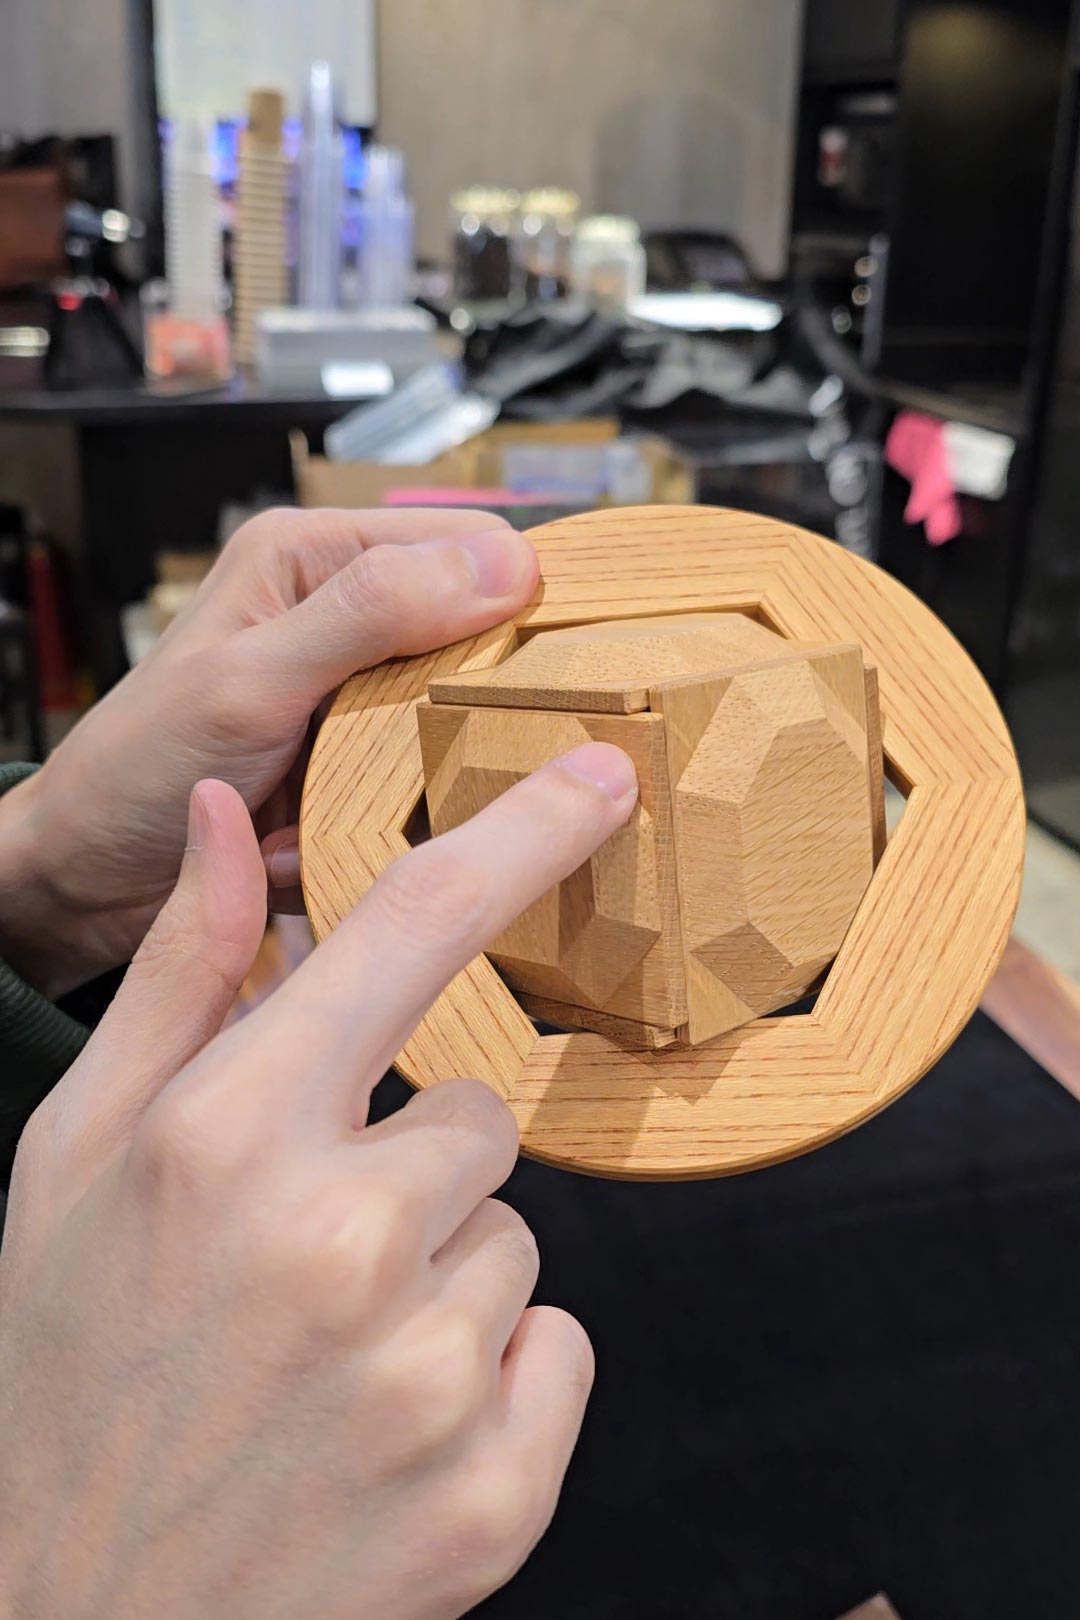 How to open the Planet with a Ring Secret Box by Karakuri Creation Group